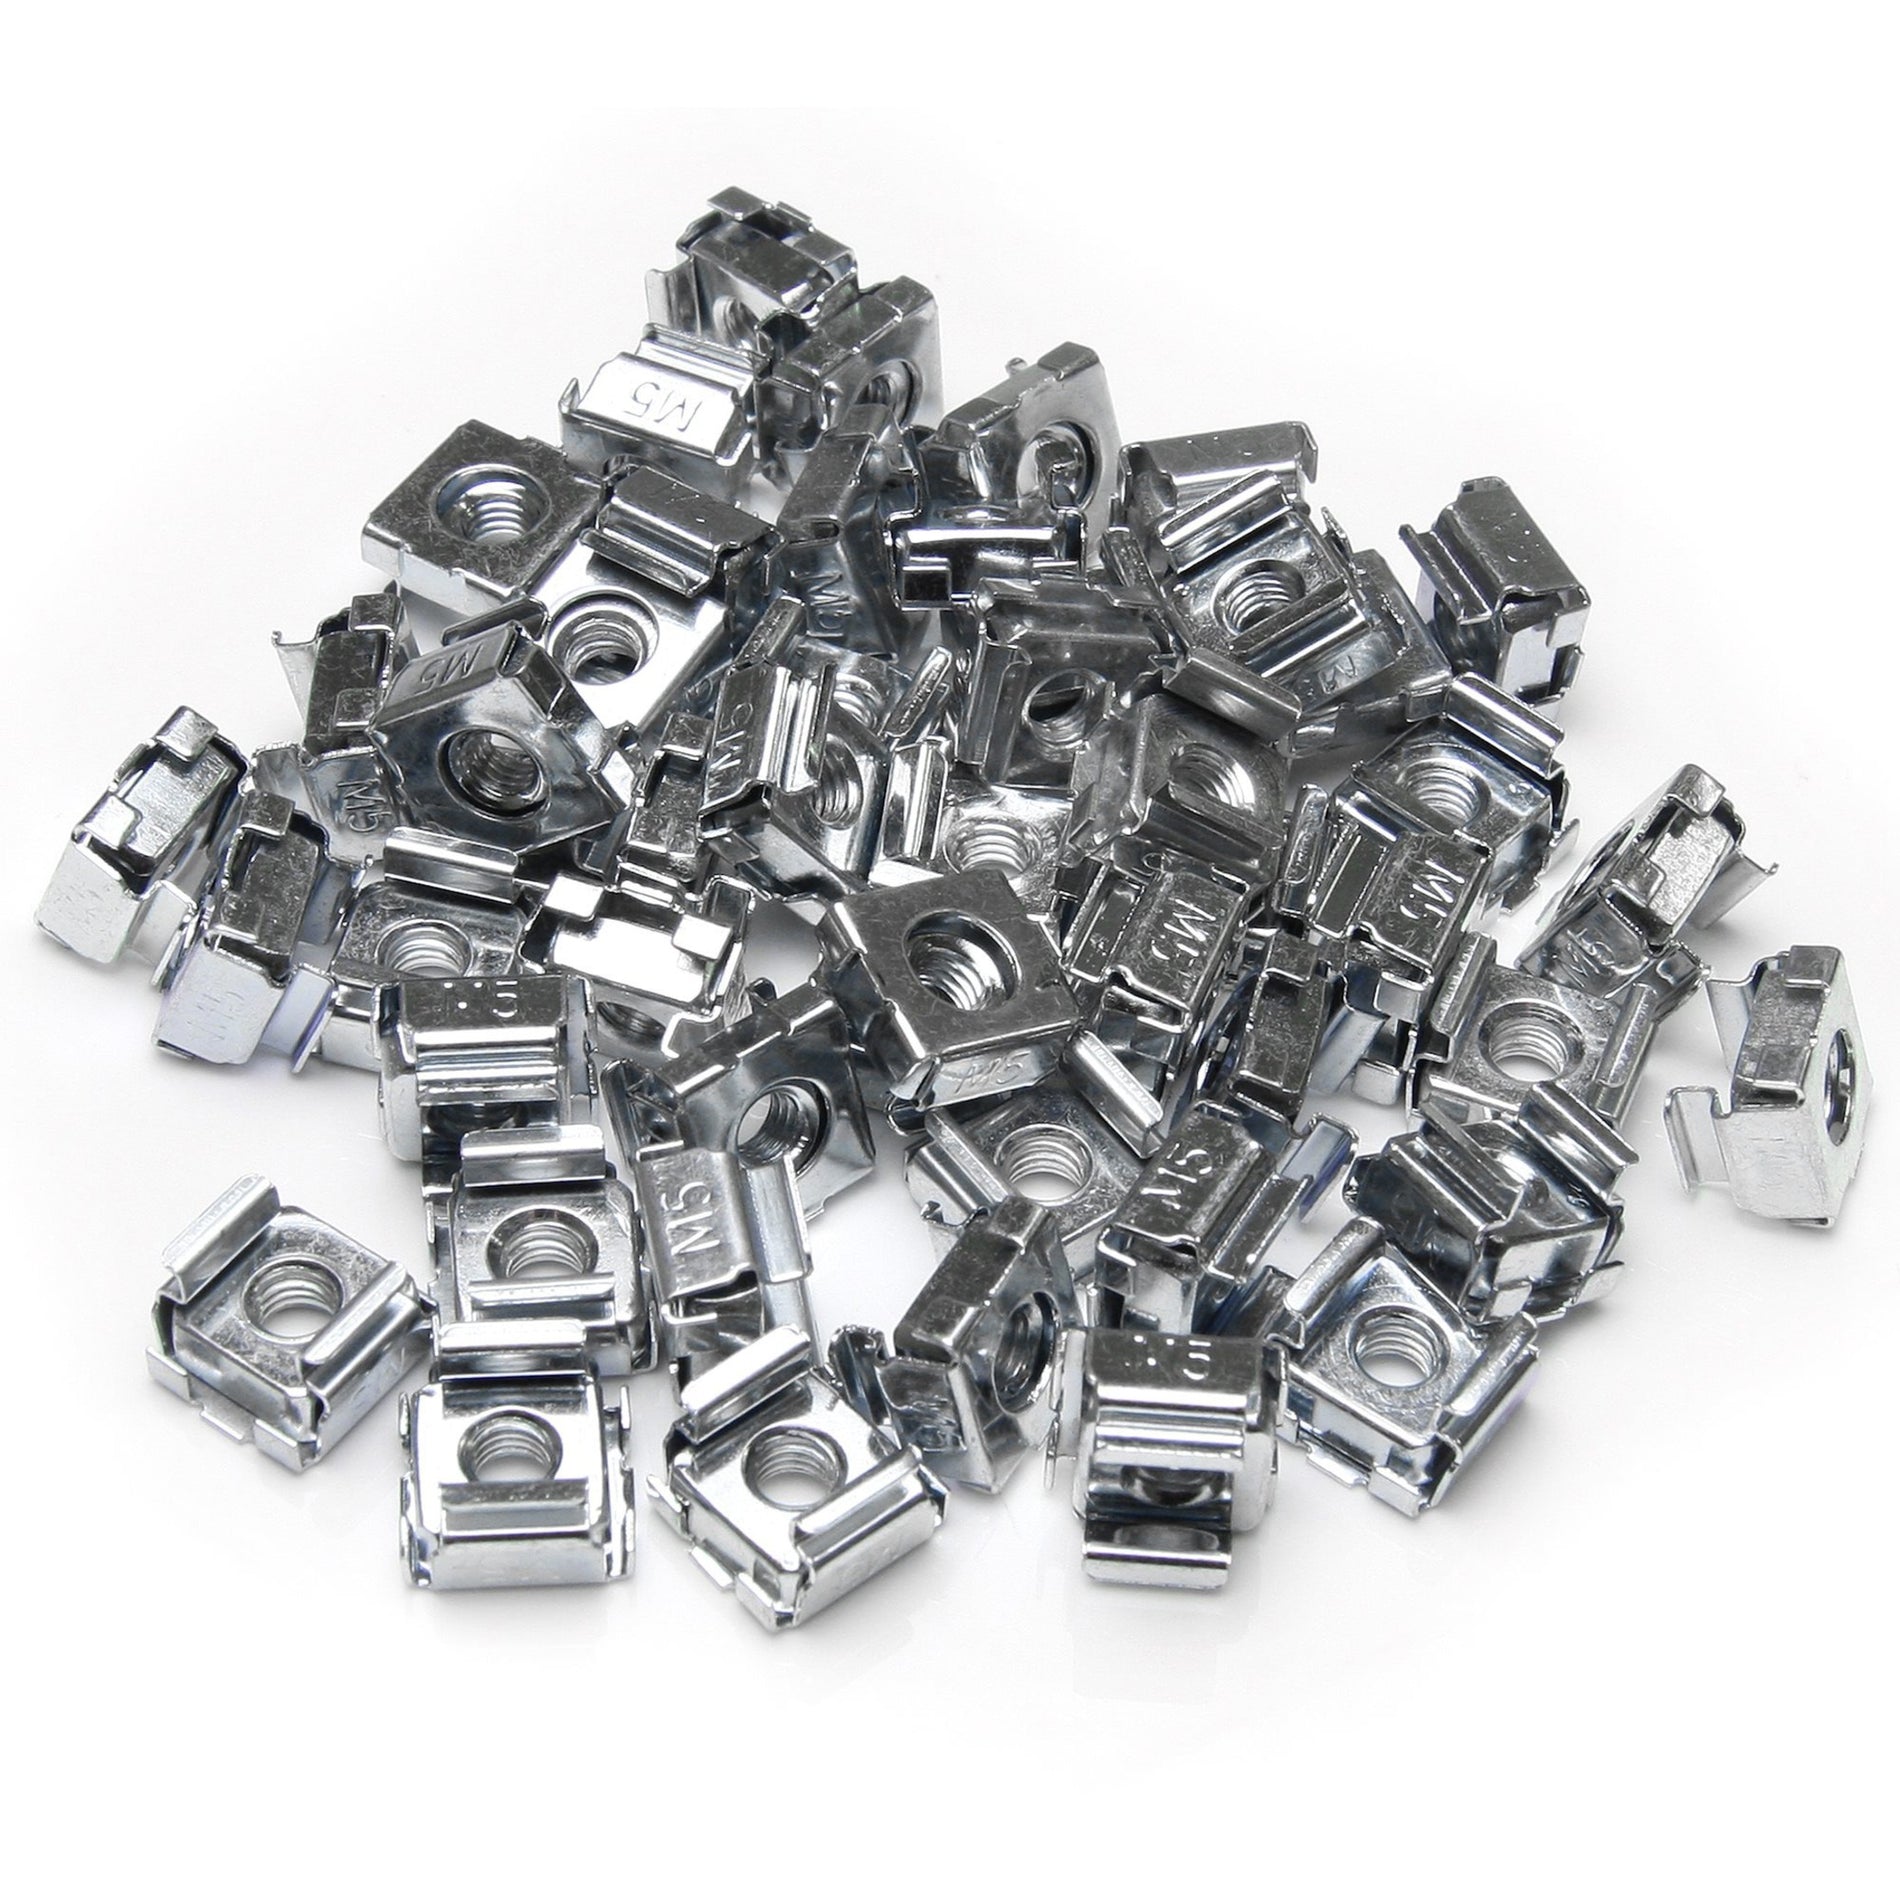 StarTech.com CABCAGENUTS Cage Nuts for Cabinet Rails - Pkg of 50, TAA Compliant, 2 Year Lifetime Warranty